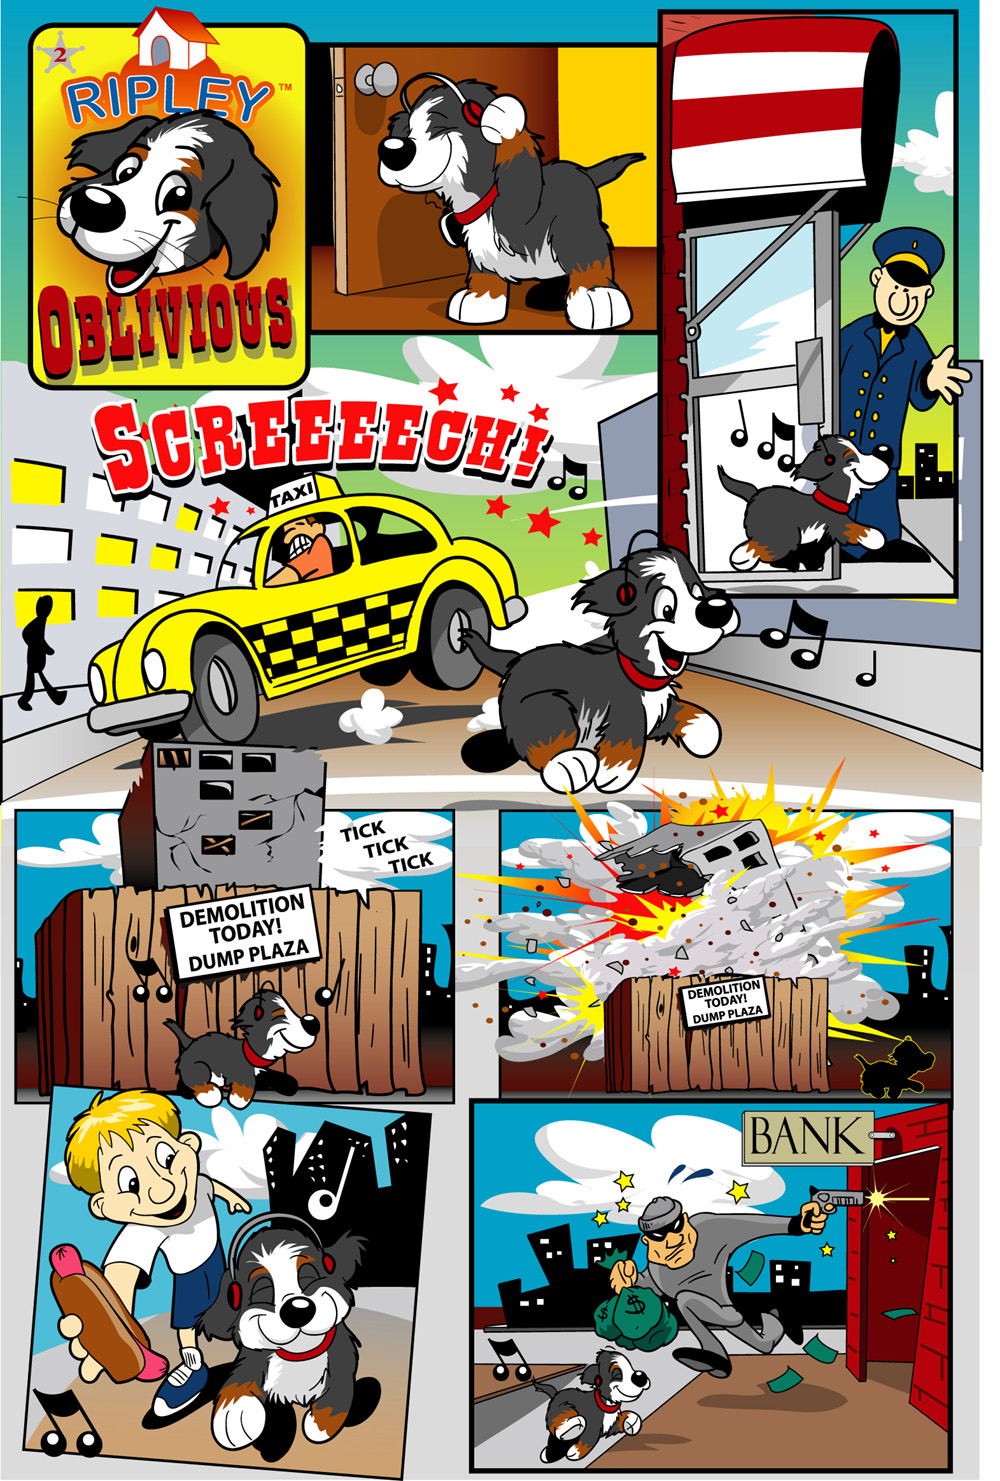 Oblivious Ripley The Dog page 1